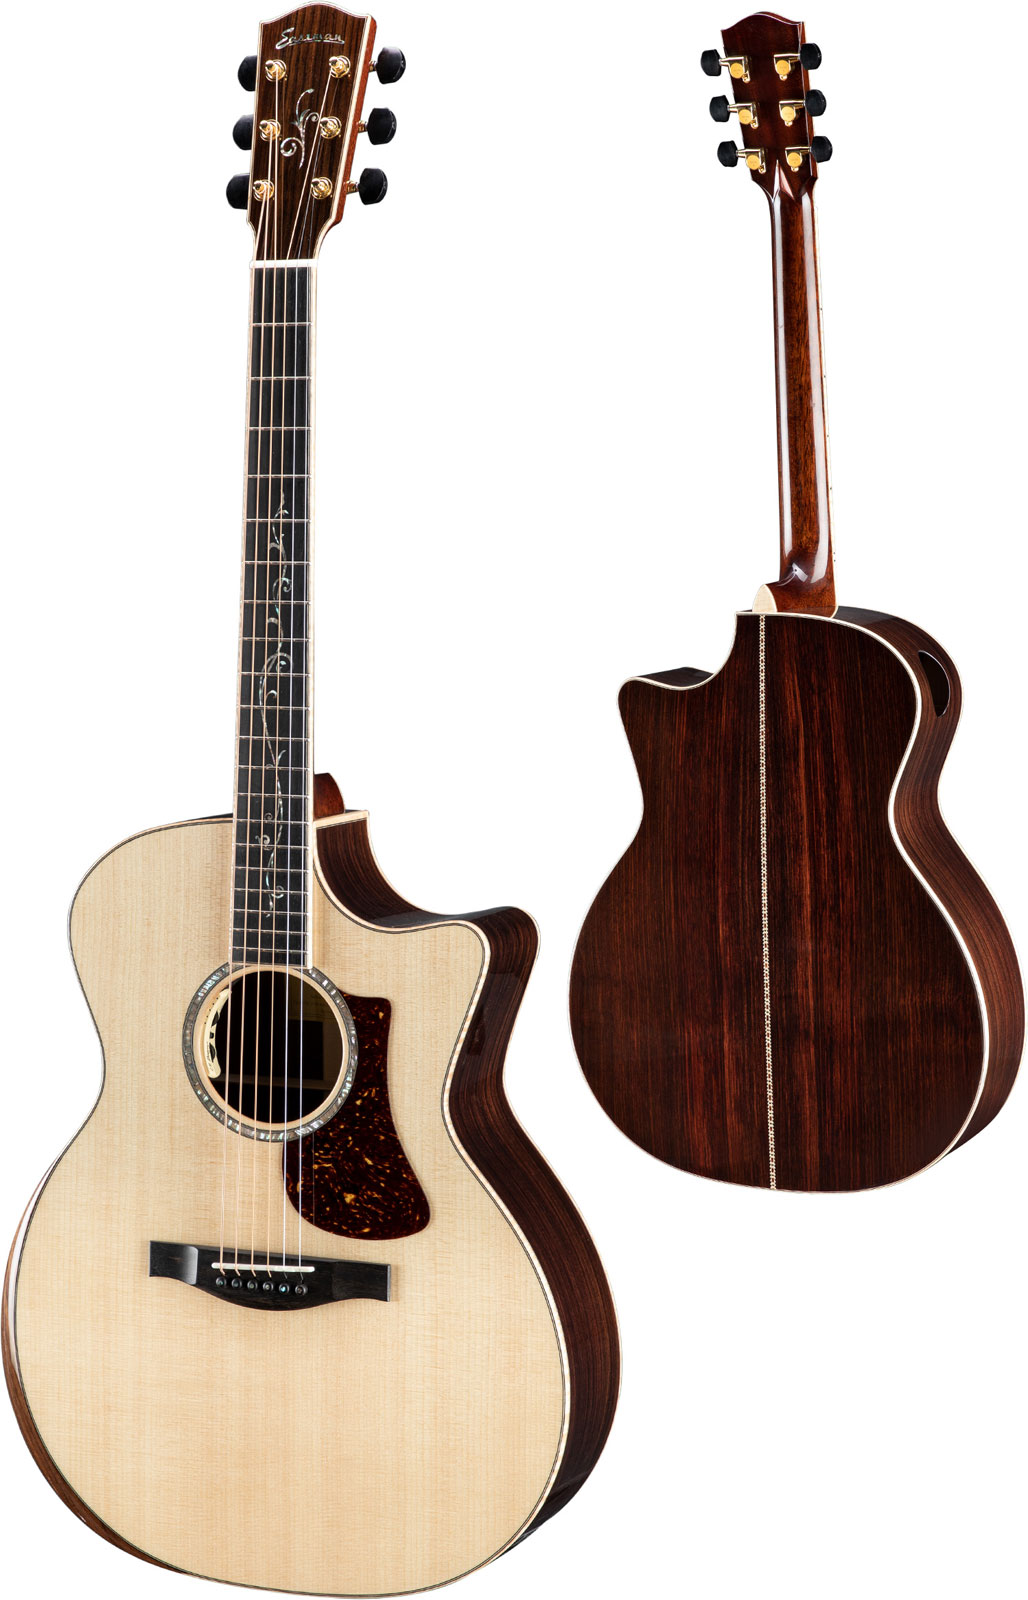 EASTMAN AC822CE NATURAL